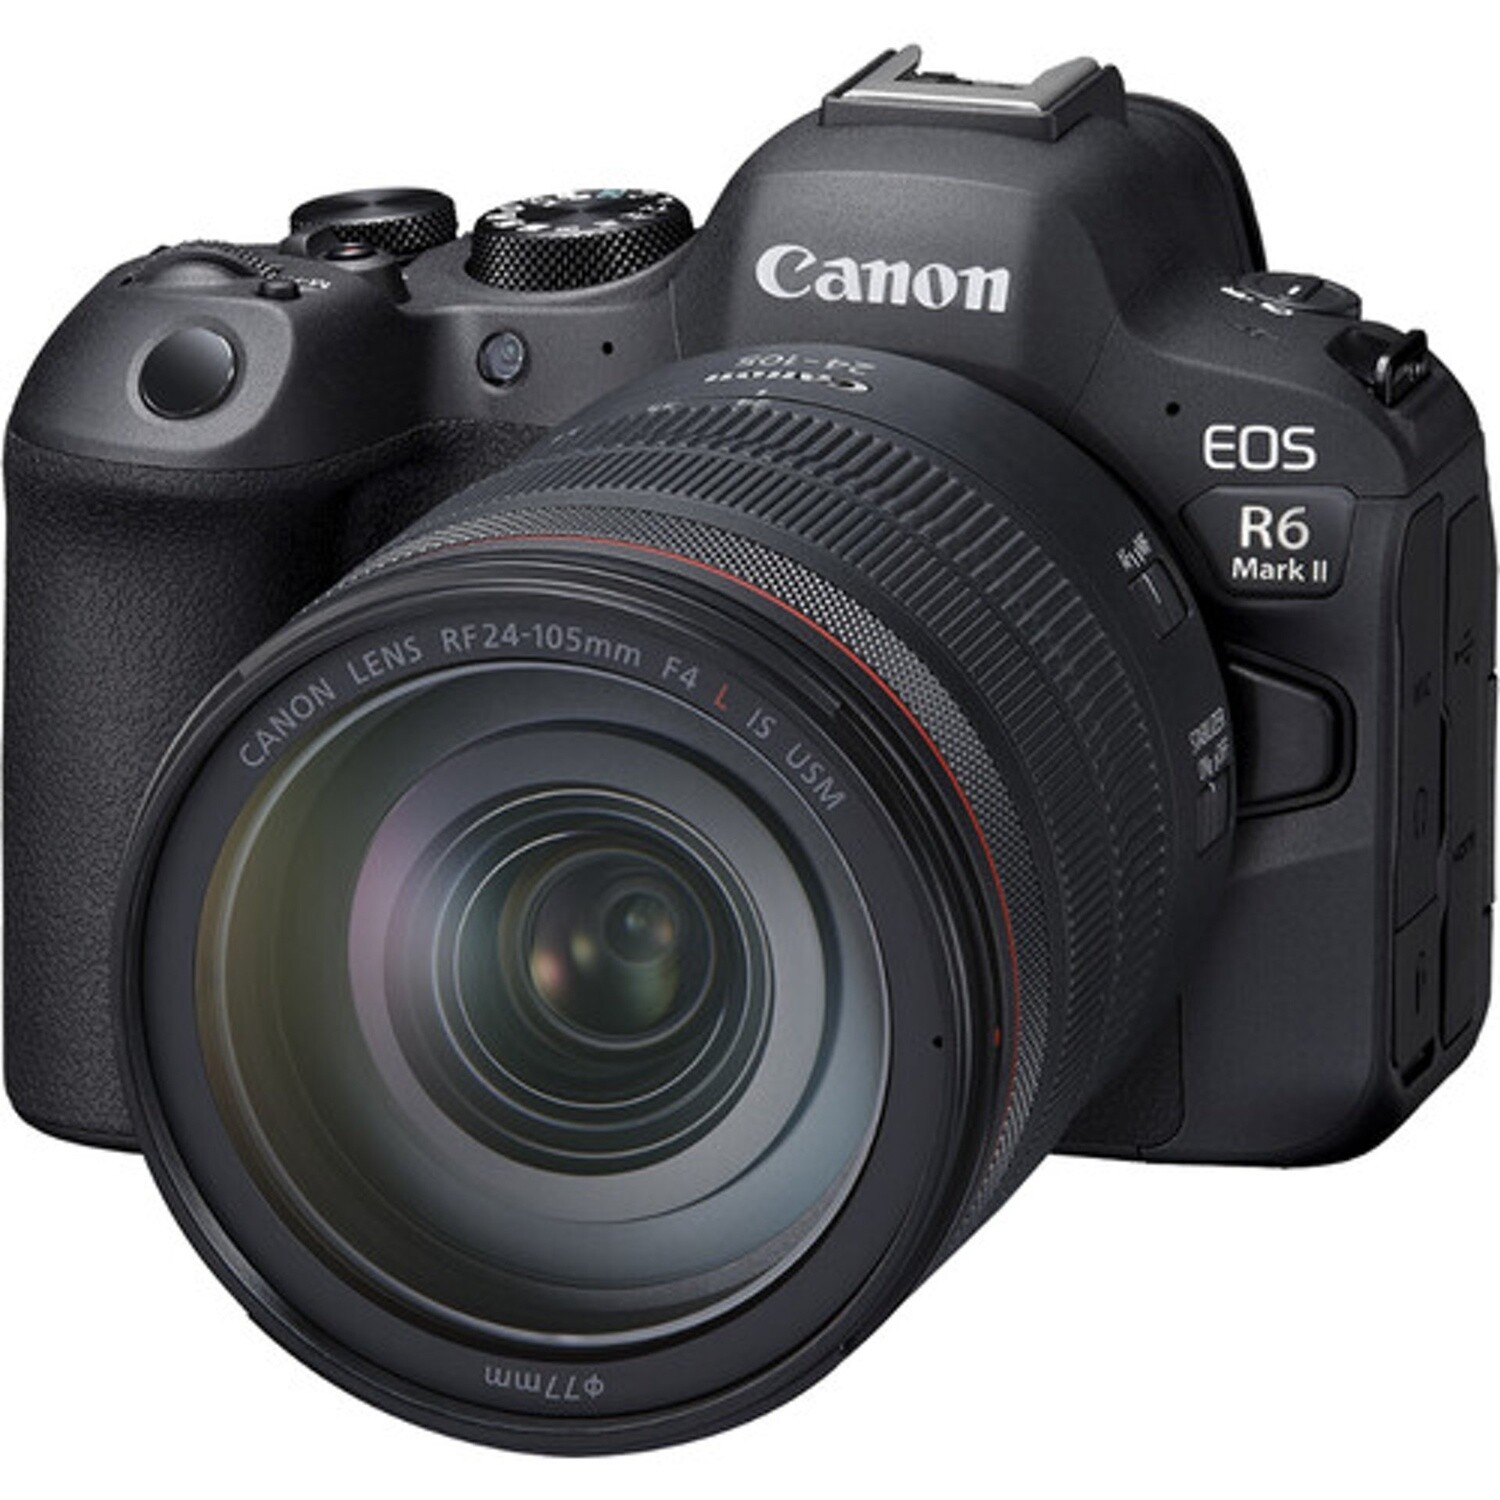 Canon EOS R6 Mark II with 24-105mm f4 L IS USM Lens